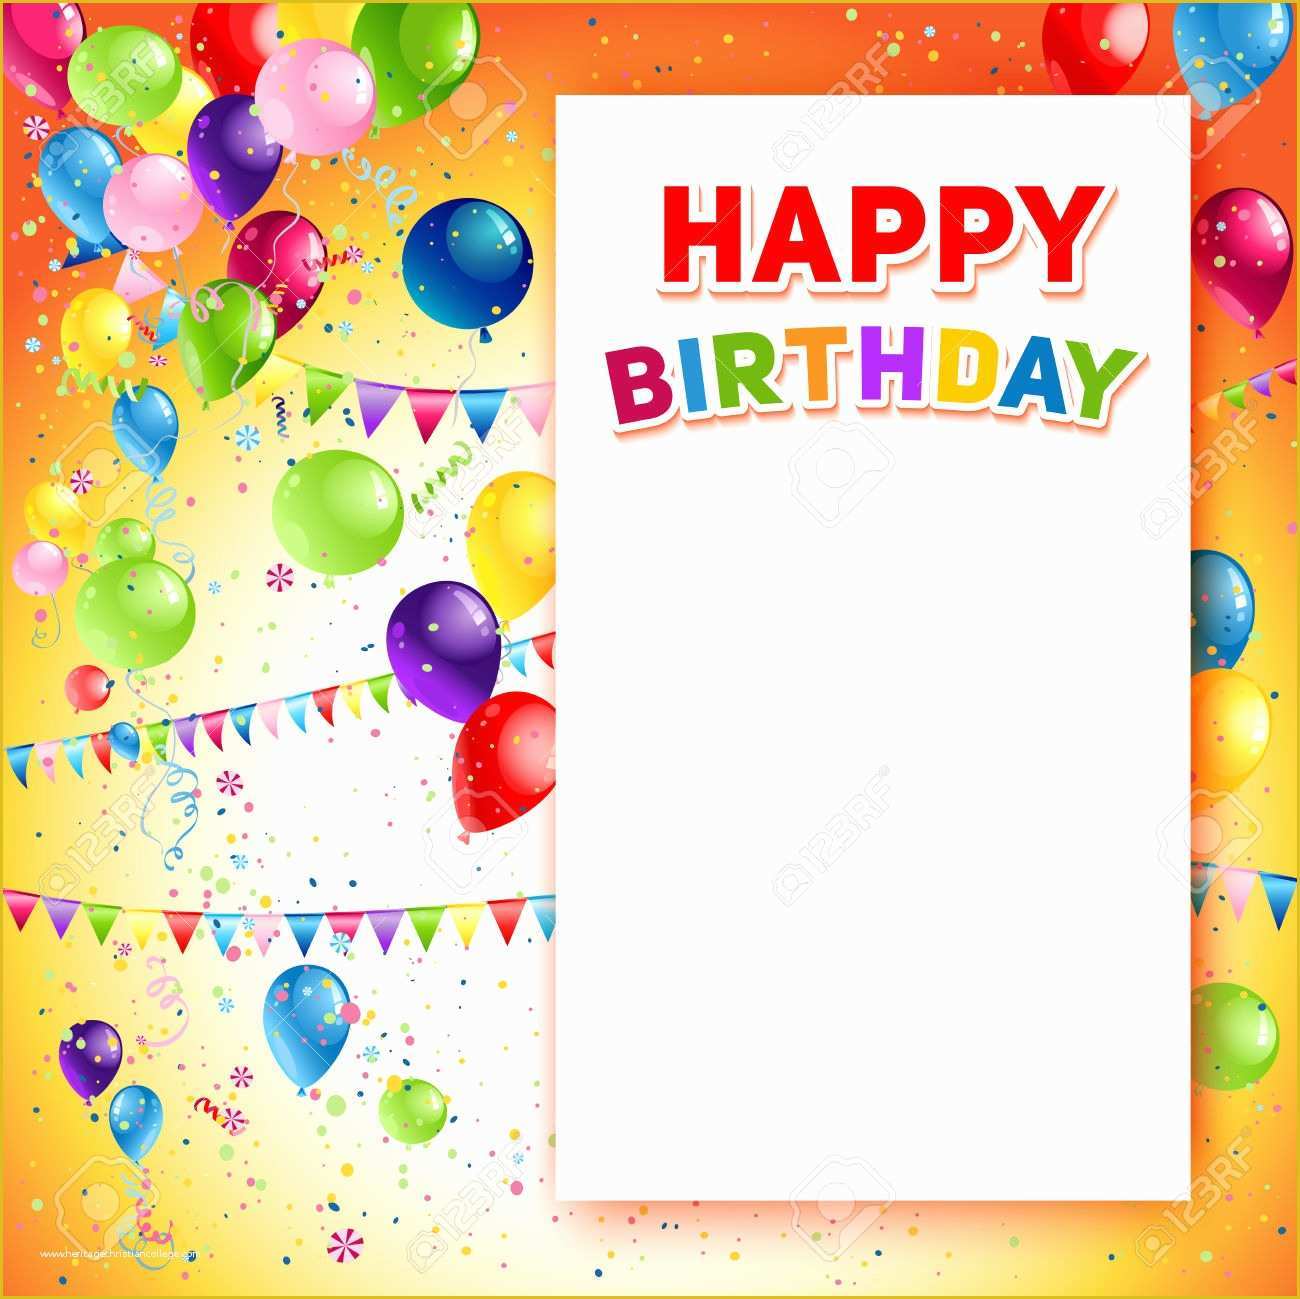 birthday templates for photoshop free download